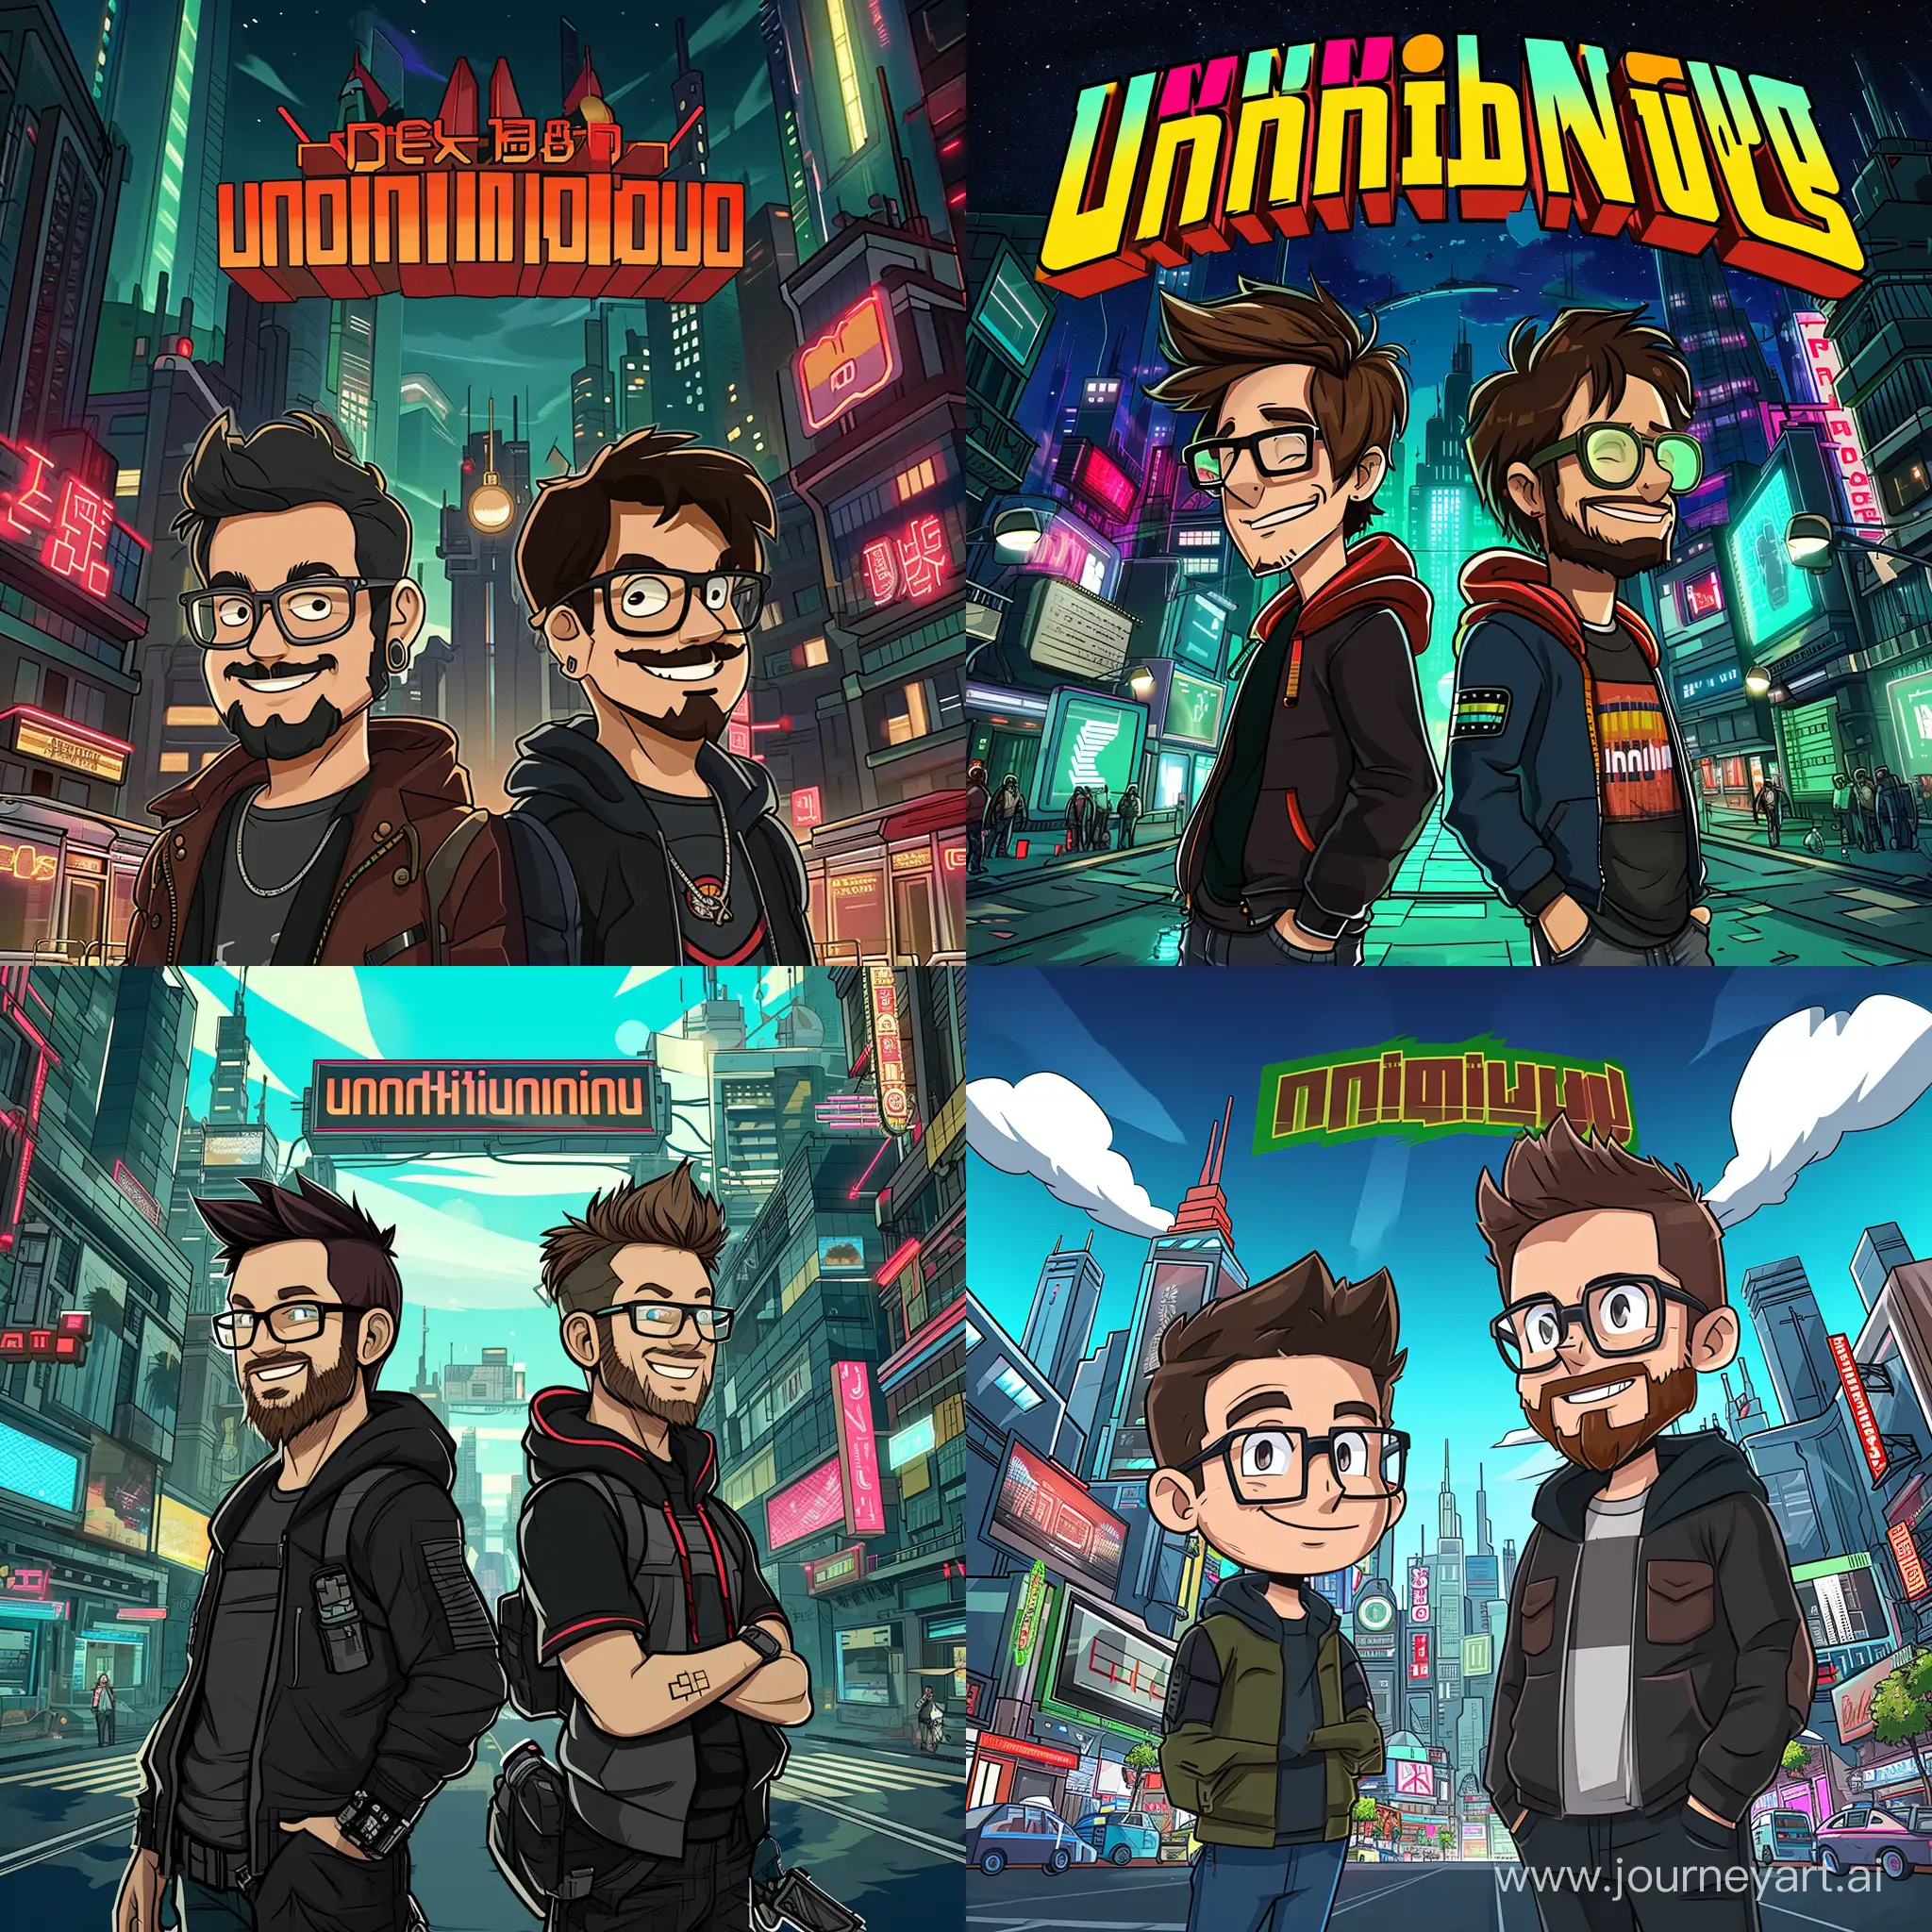 Unnus annus But as a cartoon poster with markiplier and Ethan in a cyberpunk city